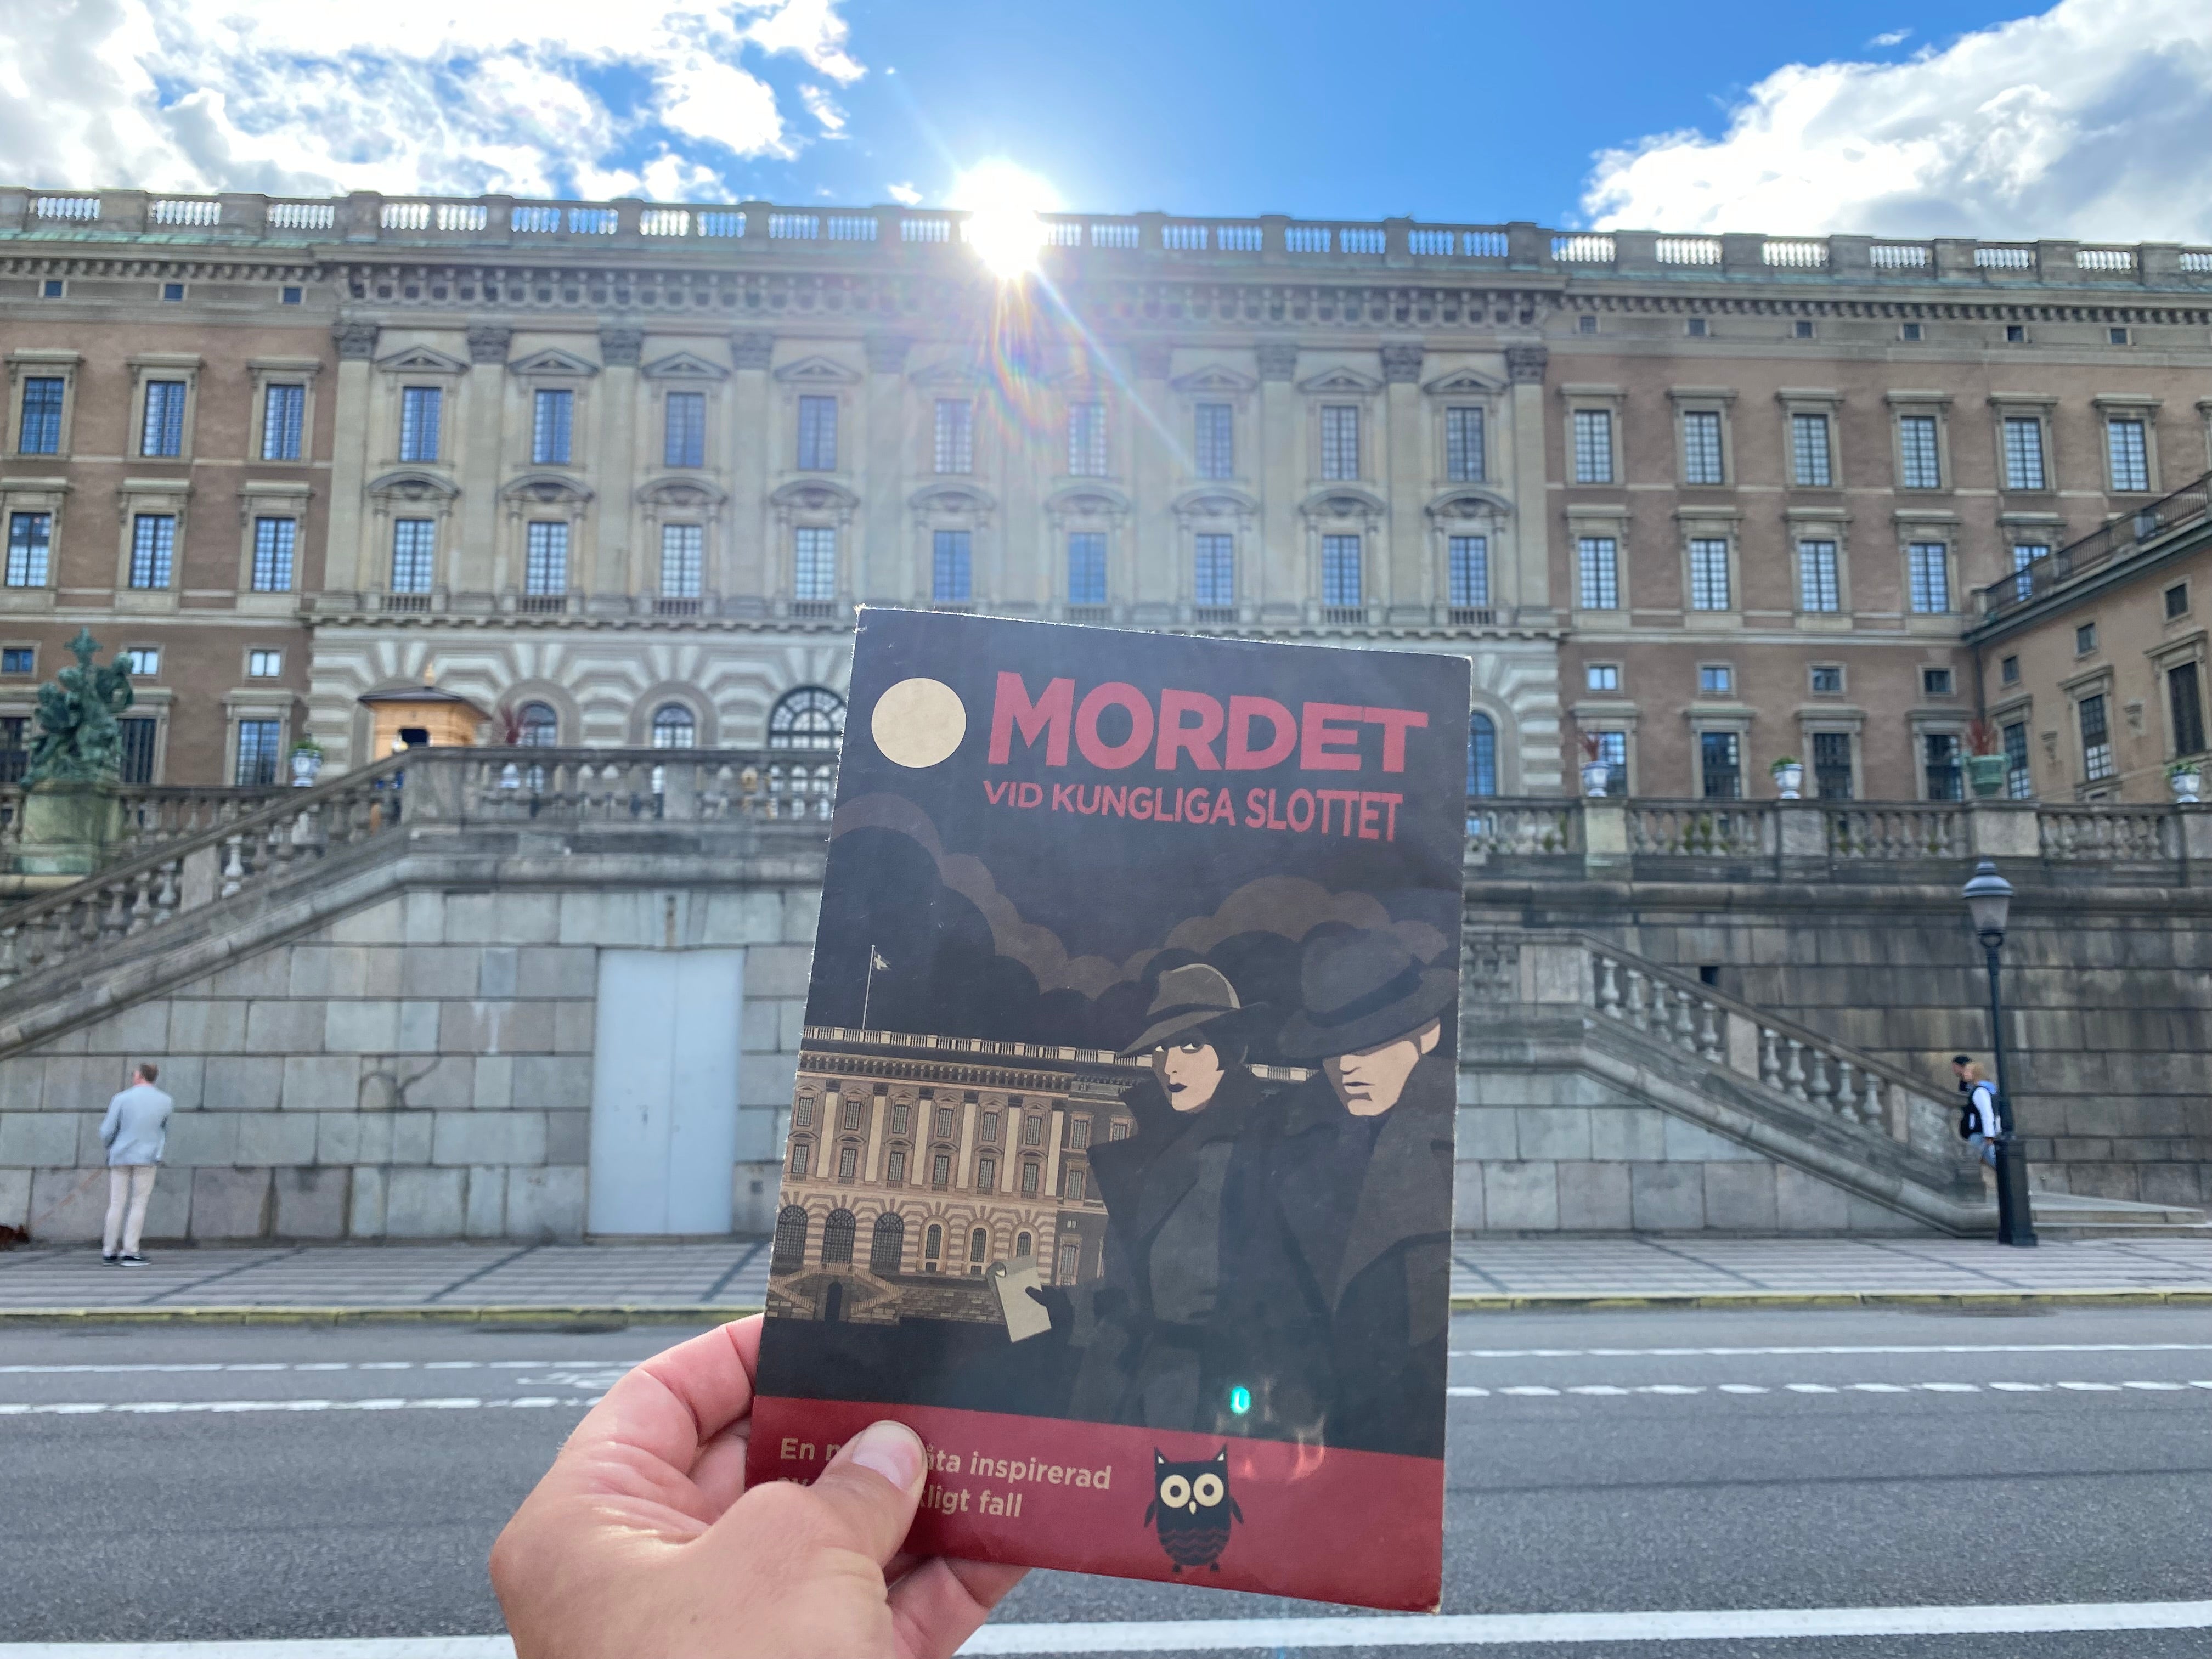 Stockholm - The Murder by The Royal Palace (Kungliga Slottet)